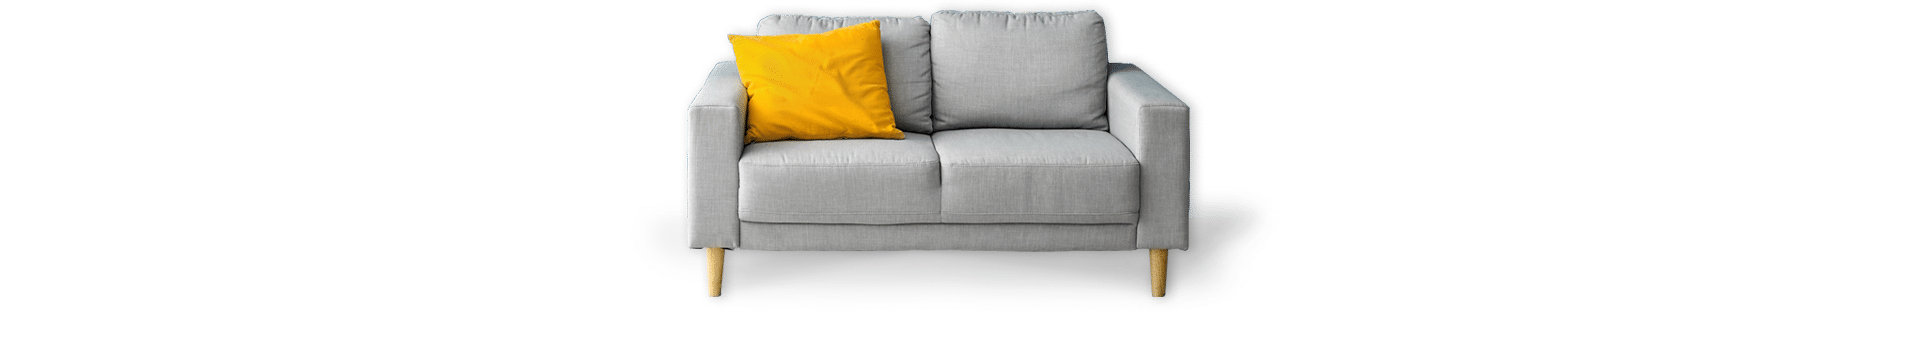 light grey couch with a yellow throw pillow